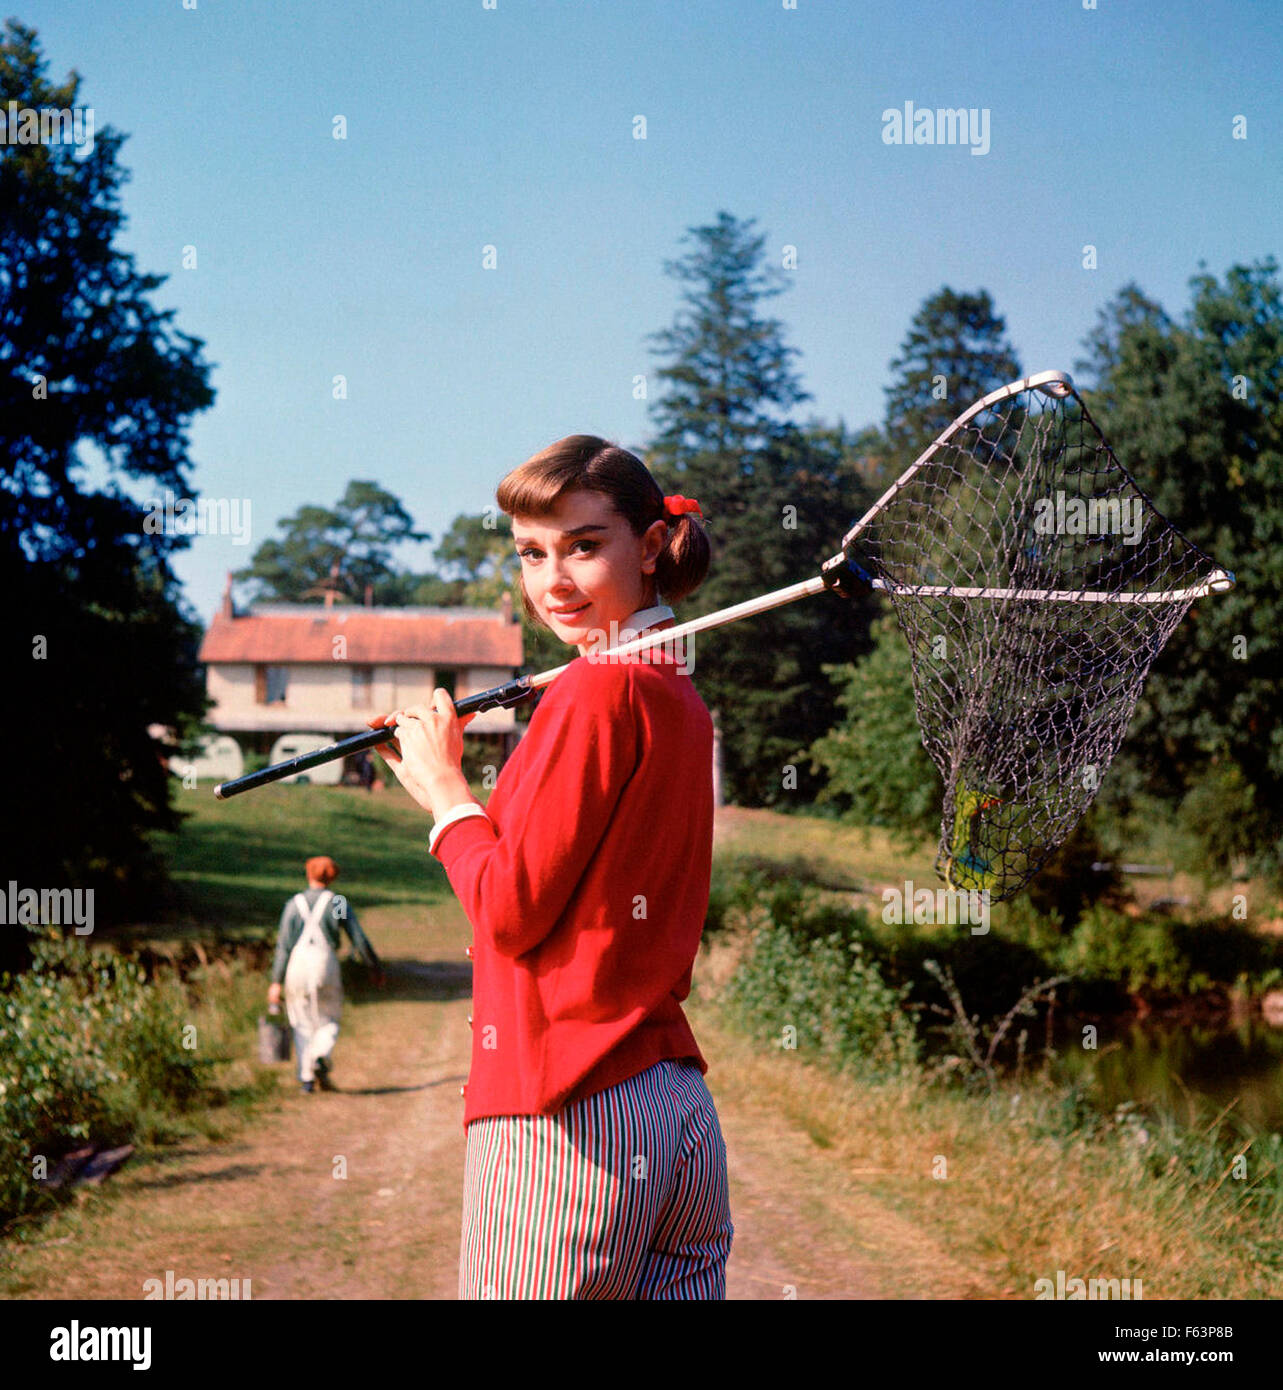 Gary Cooper, Audrey Hepburn Love in the Afternoon 1957 Allied Artists  File Reference # 32733 231THA Stock Photo - Alamy